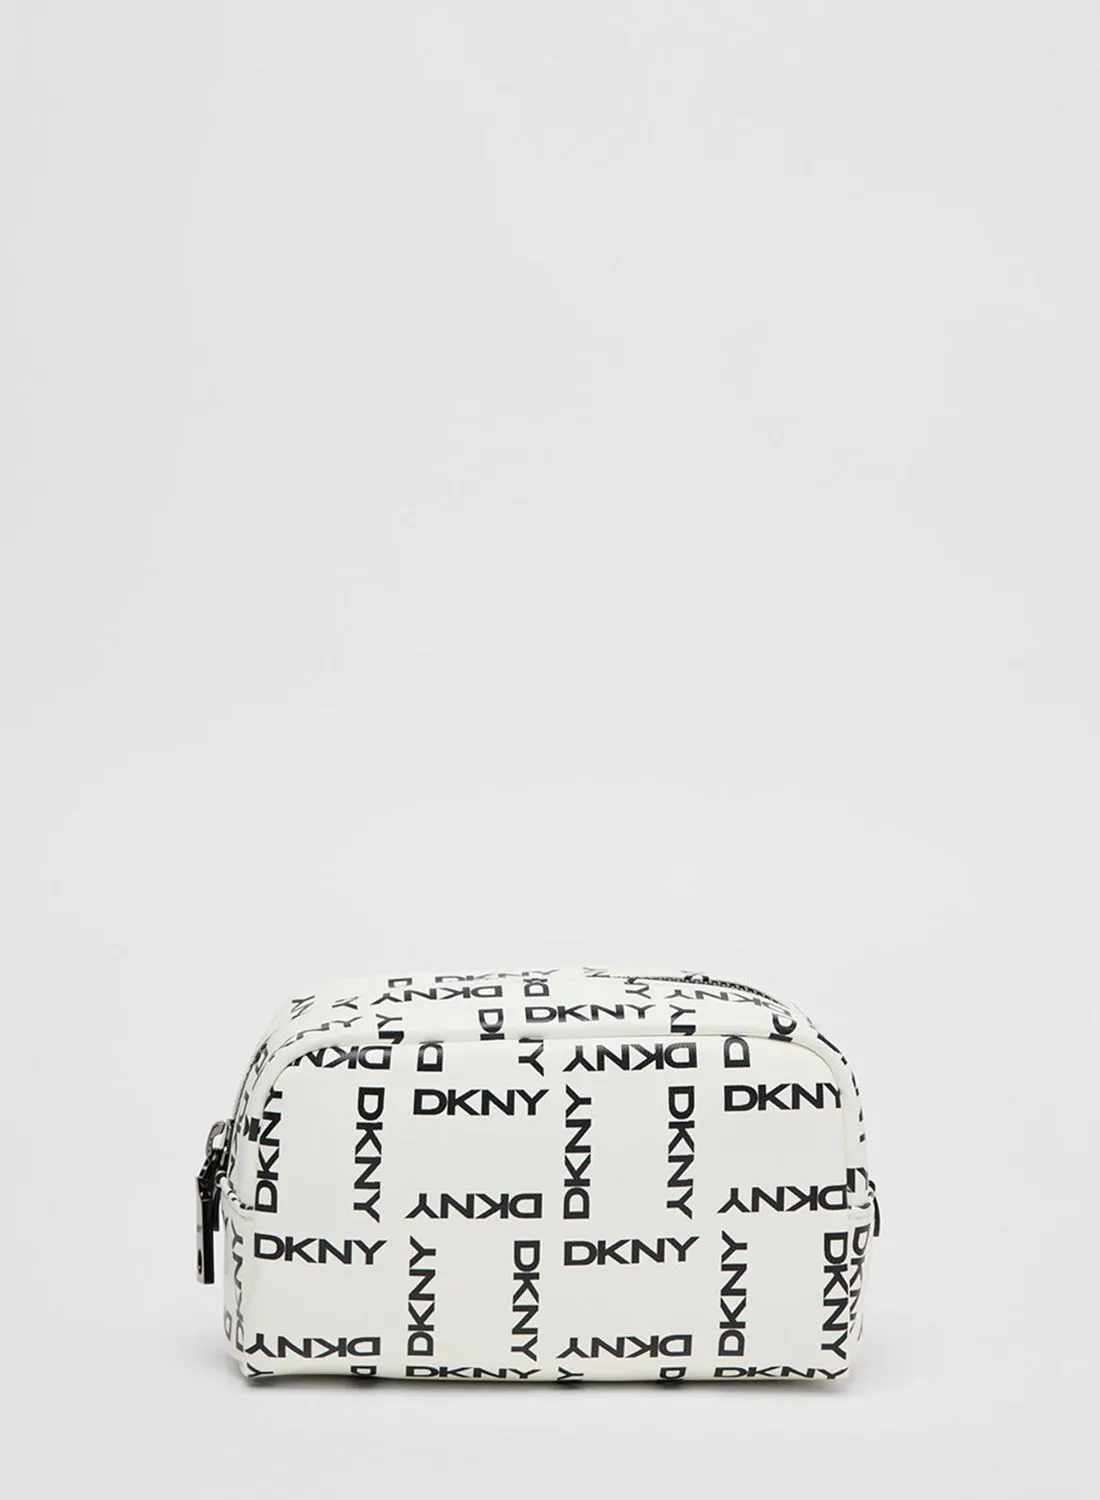 DKNY Tilly Logo Cosmetic Pouch